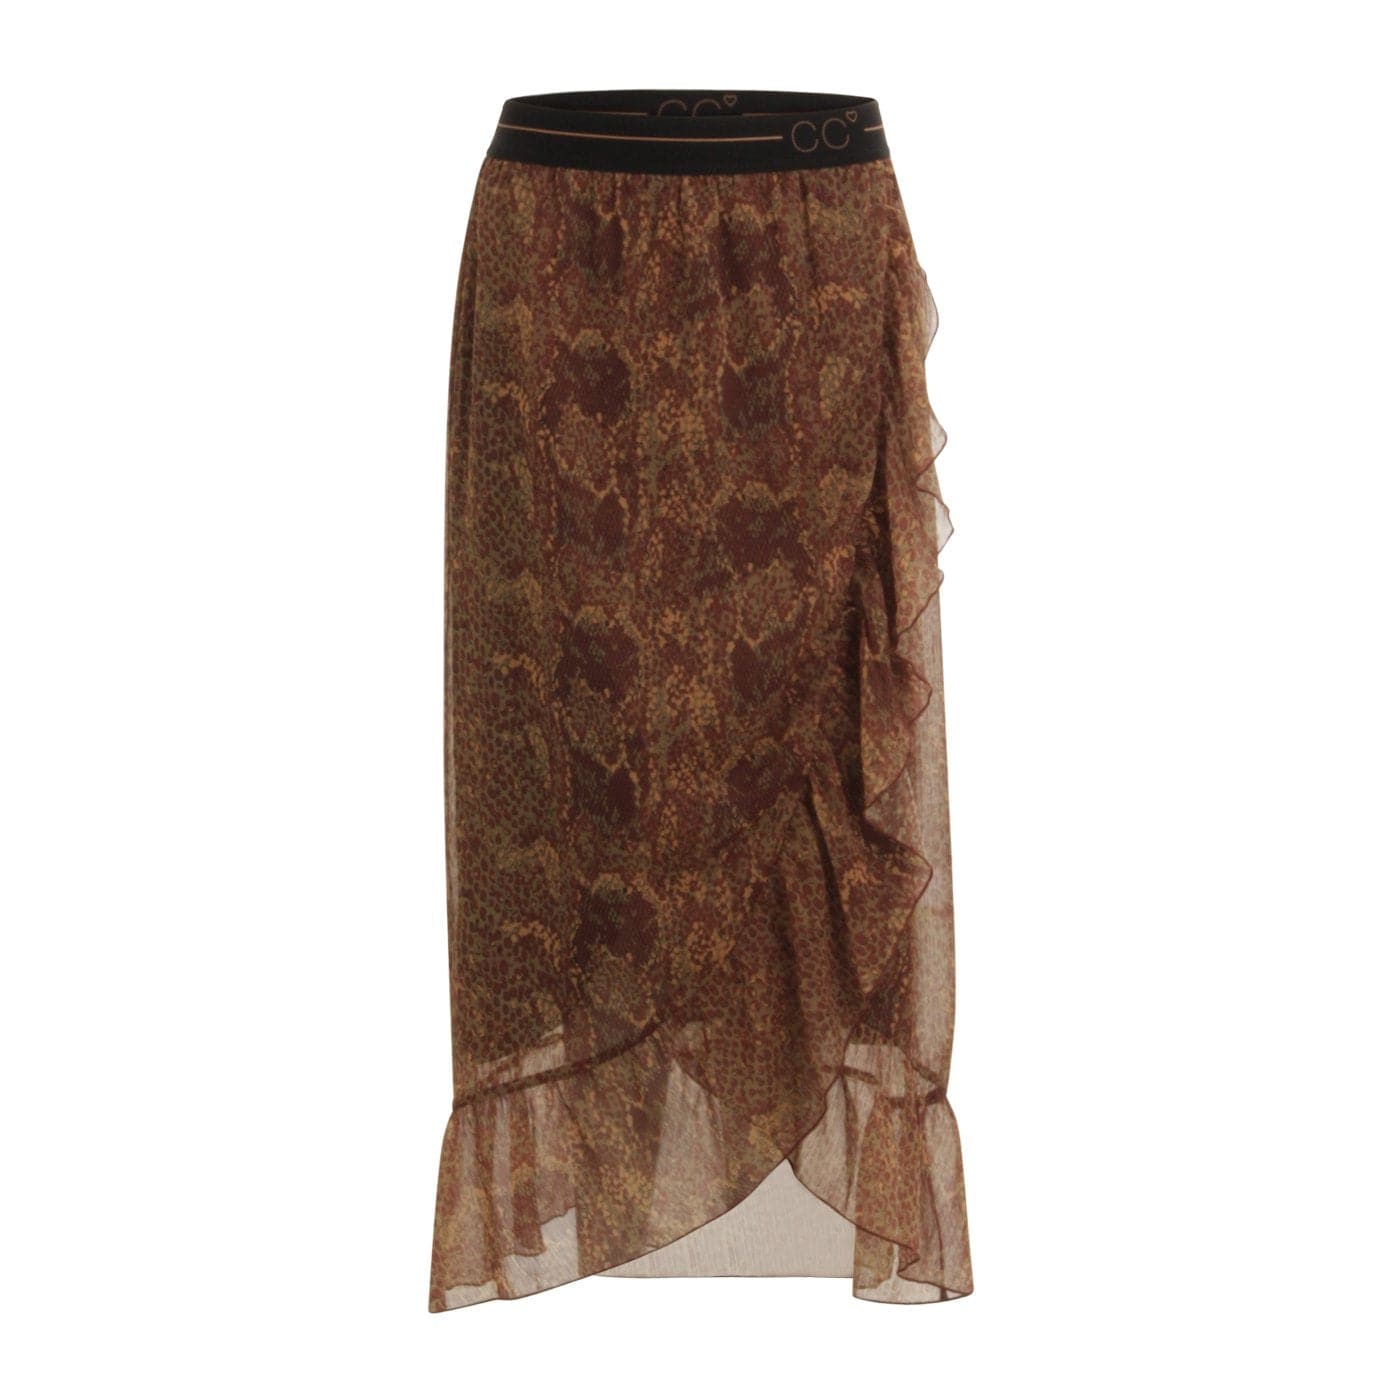 Coster Copenhagen Long Skirt with Python Print and Frill - Your Style Your Story